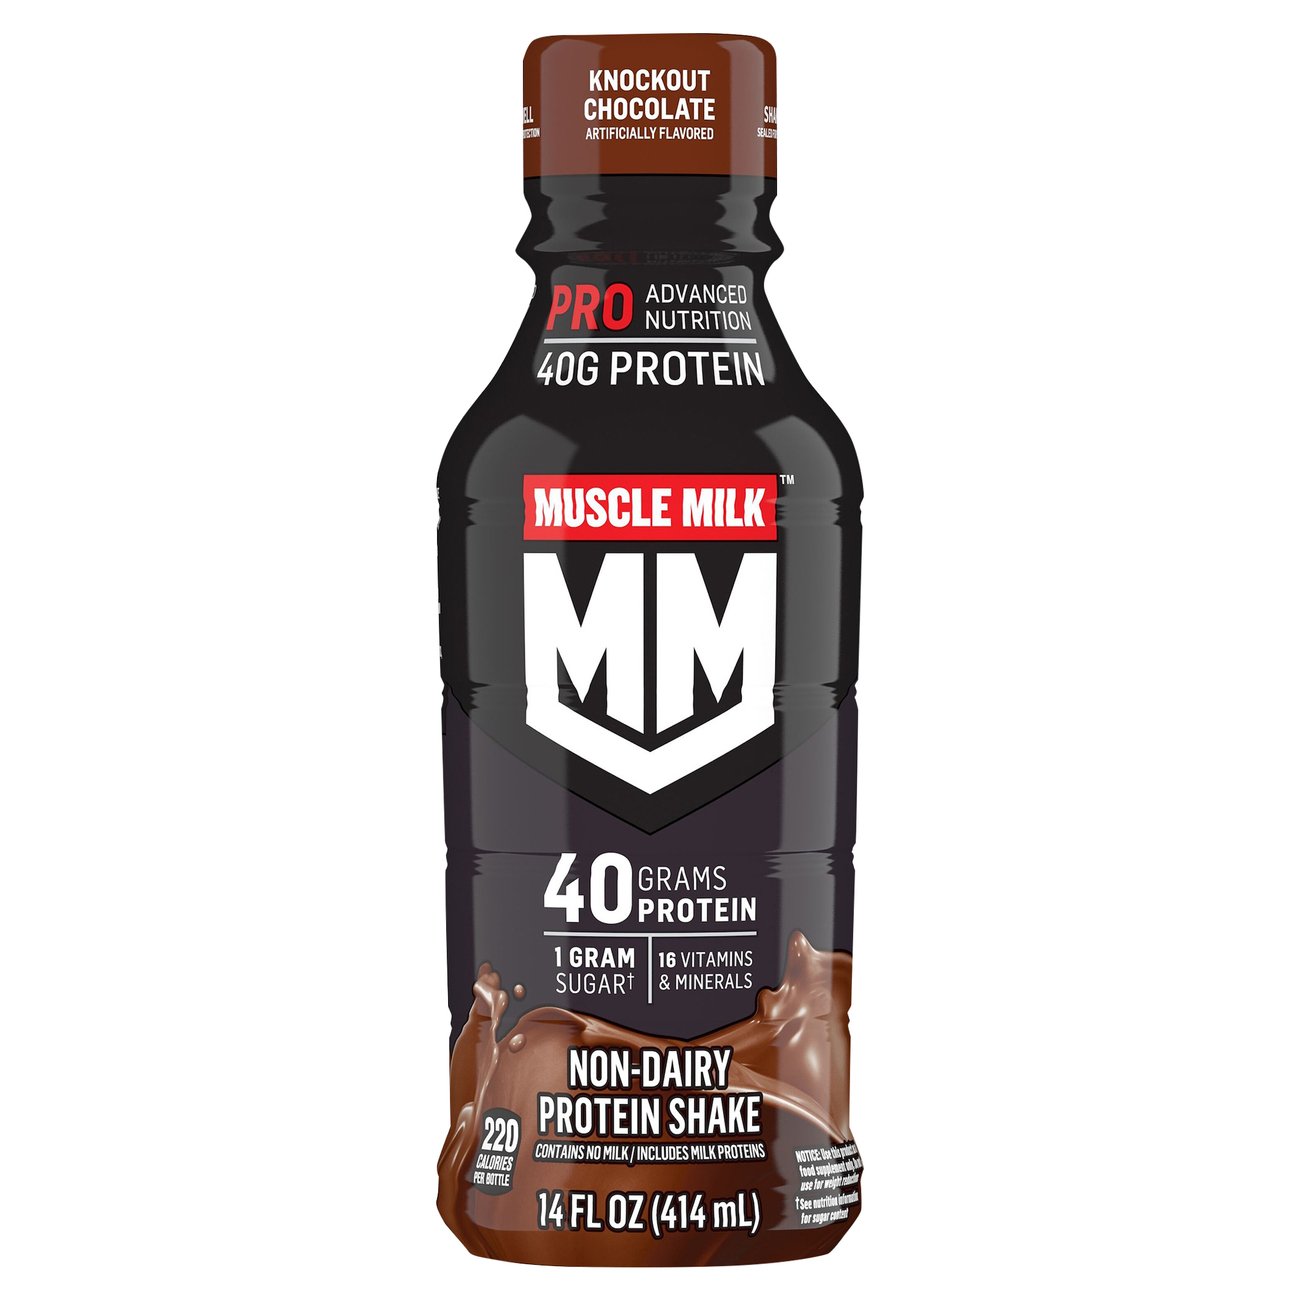 muscle-milk-pro-series-protein-shake-40g-knockout-chocolate-shop